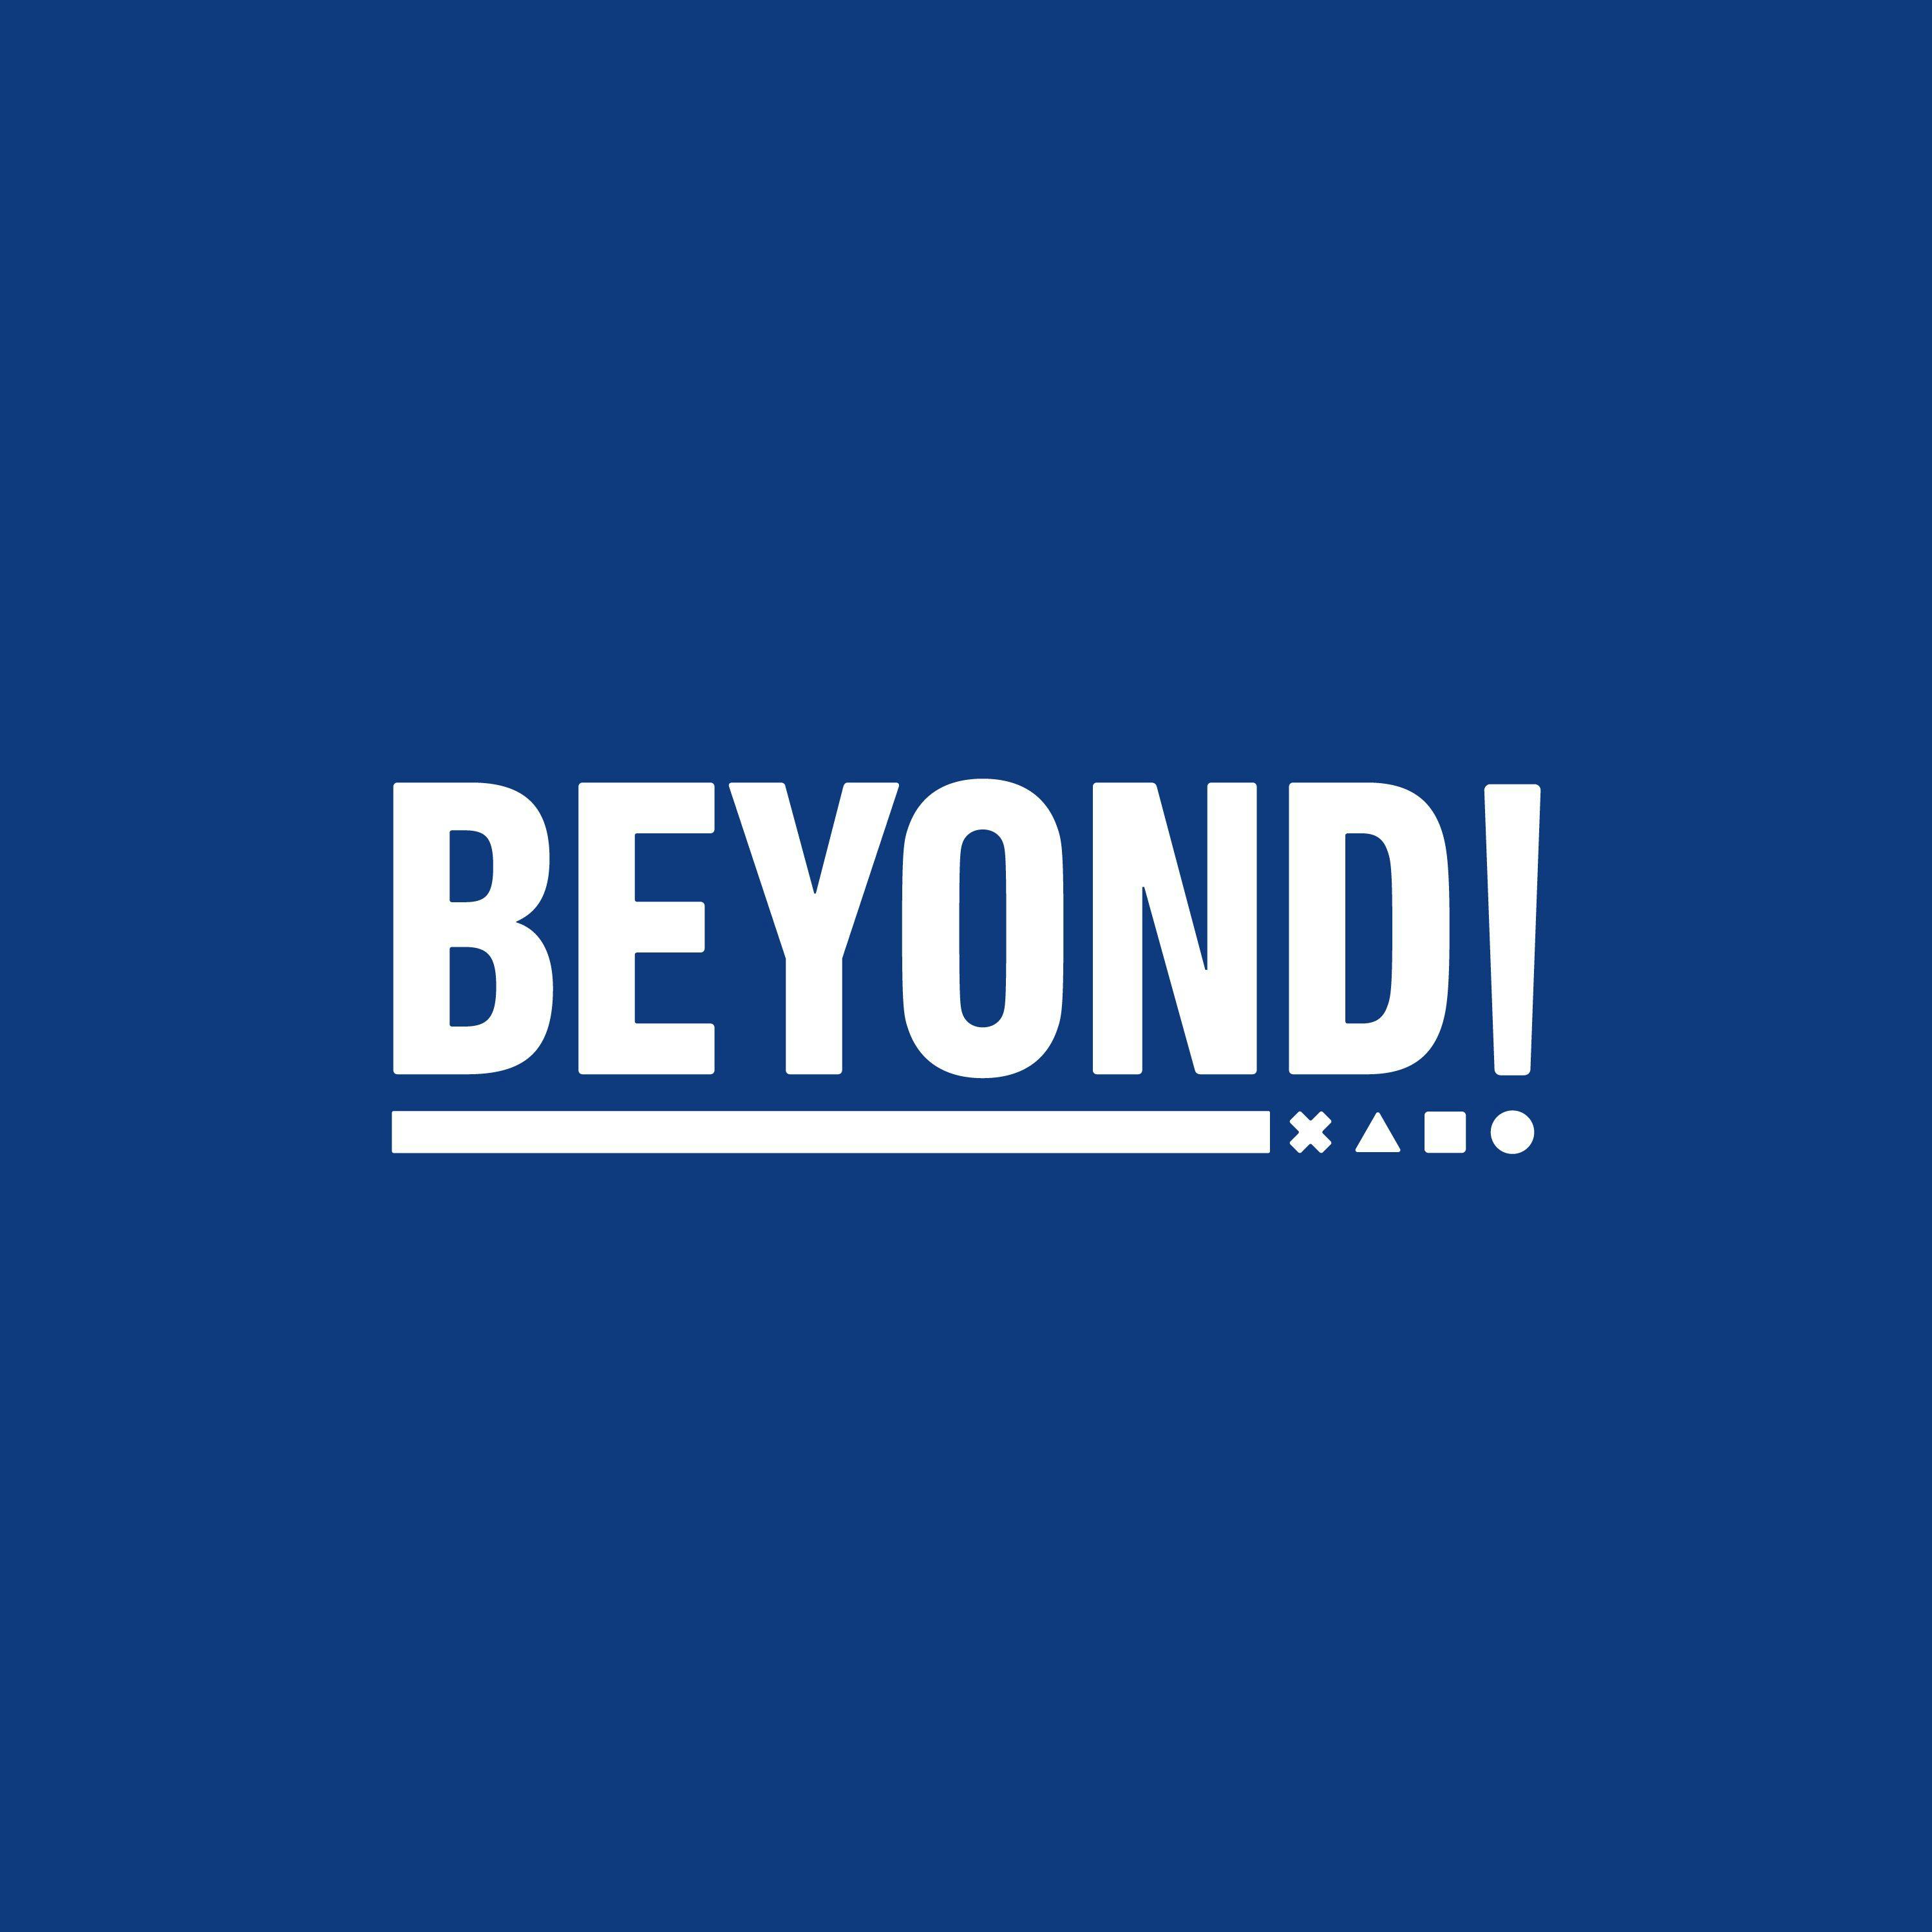 Will PS5's Be Tough to Get This Holiday? - Beyond Episode 641